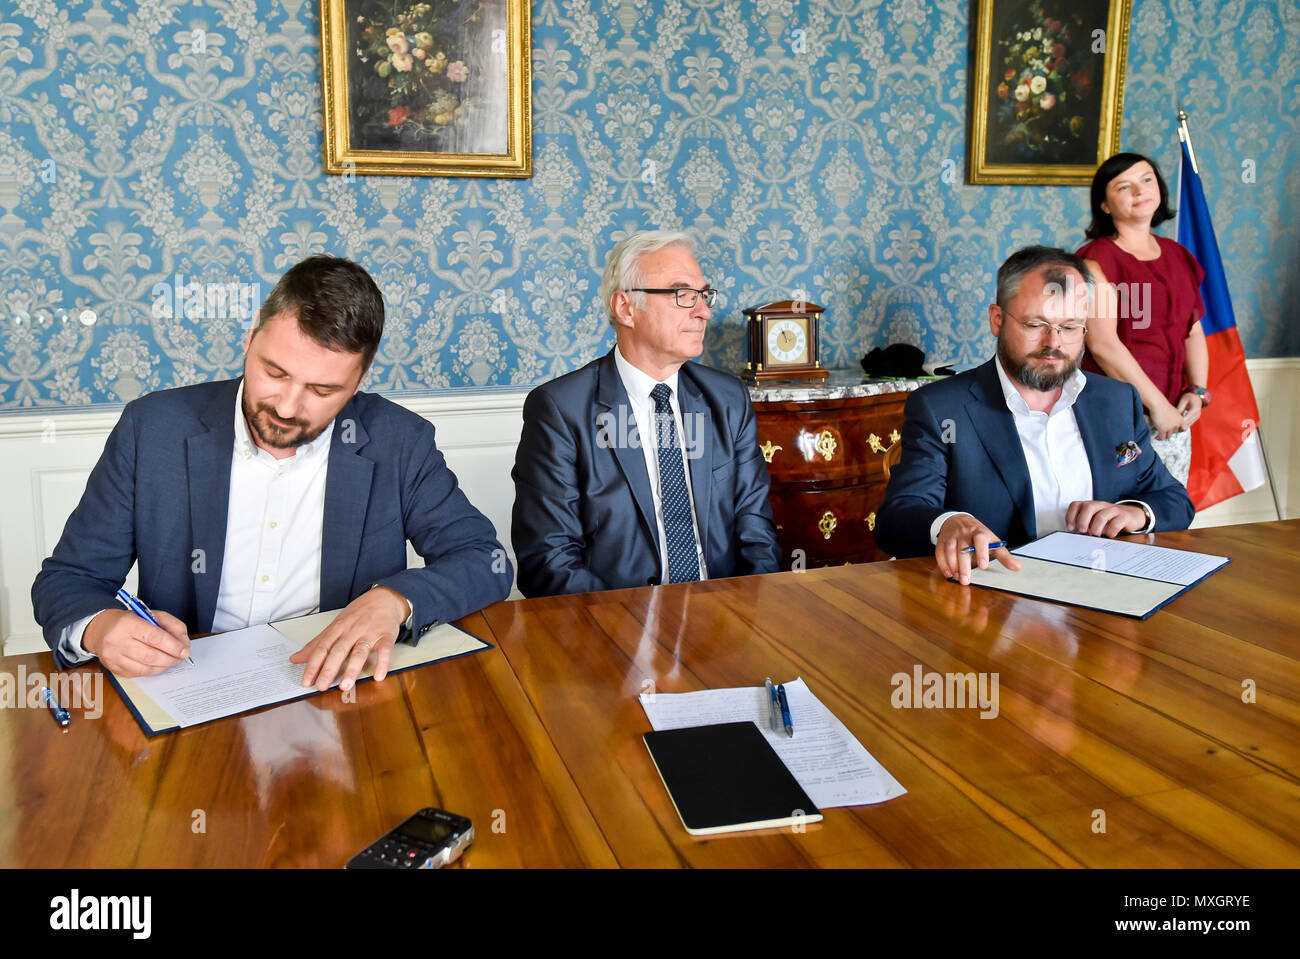 The National Film Archive (NFA) and the Film and Television School of the Academy of Performing Art (FAMU) in Prague made an agreement on the digitisation of Czech films today, on Monday, June 4, 2018. The agreement, signed by FAMU Dean Zdenek Holy, left, and NFA director Michal Bregant, right, guarantees that the digital restoration would be carried out in cooperation with the living film-makers, primarily the director, photographer and sound mixer, that their testimonies and expert opinions will be recorded. On the photo centre there is Culture Minister Ilja Smid. (CTK Photo/Vit Simanek) Stock Photo